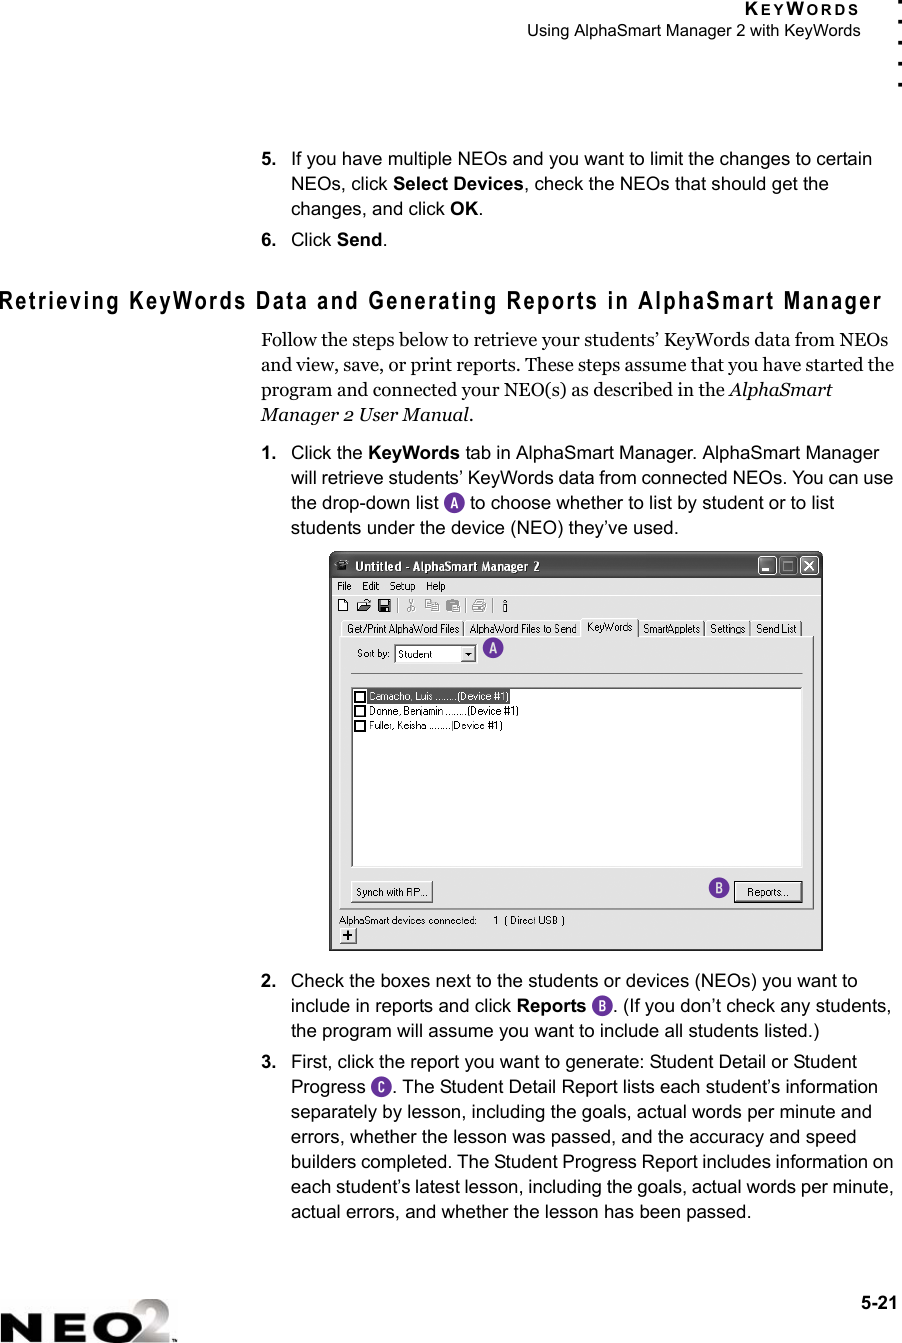 KEYWORDSUsing AlphaSmart Manager 2 with KeyWords5-21. . . . .5. If you have multiple NEOs and you want to limit the changes to certain NEOs, click Select Devices, check the NEOs that should get the changes, and click OK.6. Click Send.Retrieving KeyWords Data and Generating Reports in AlphaSmart ManagerFollow the steps below to retrieve your students’ KeyWords data from NEOs and view, save, or print reports. These steps assume that you have started the program and connected your NEO(s) as described in the AlphaSmart Manager 2 User Manual.1. Click the KeyWords tab in AlphaSmart Manager. AlphaSmart Manager will retrieve students’ KeyWords data from connected NEOs. You can use the drop-down list A to choose whether to list by student or to list students under the device (NEO) they’ve used.2. Check the boxes next to the students or devices (NEOs) you want to include in reports and click Reports B. (If you don’t check any students, the program will assume you want to include all students listed.)3. First, click the report you want to generate: Student Detail or Student Progress C. The Student Detail Report lists each student’s information separately by lesson, including the goals, actual words per minute and errors, whether the lesson was passed, and the accuracy and speed builders completed. The Student Progress Report includes information on each student’s latest lesson, including the goals, actual words per minute, actual errors, and whether the lesson has been passed.AB